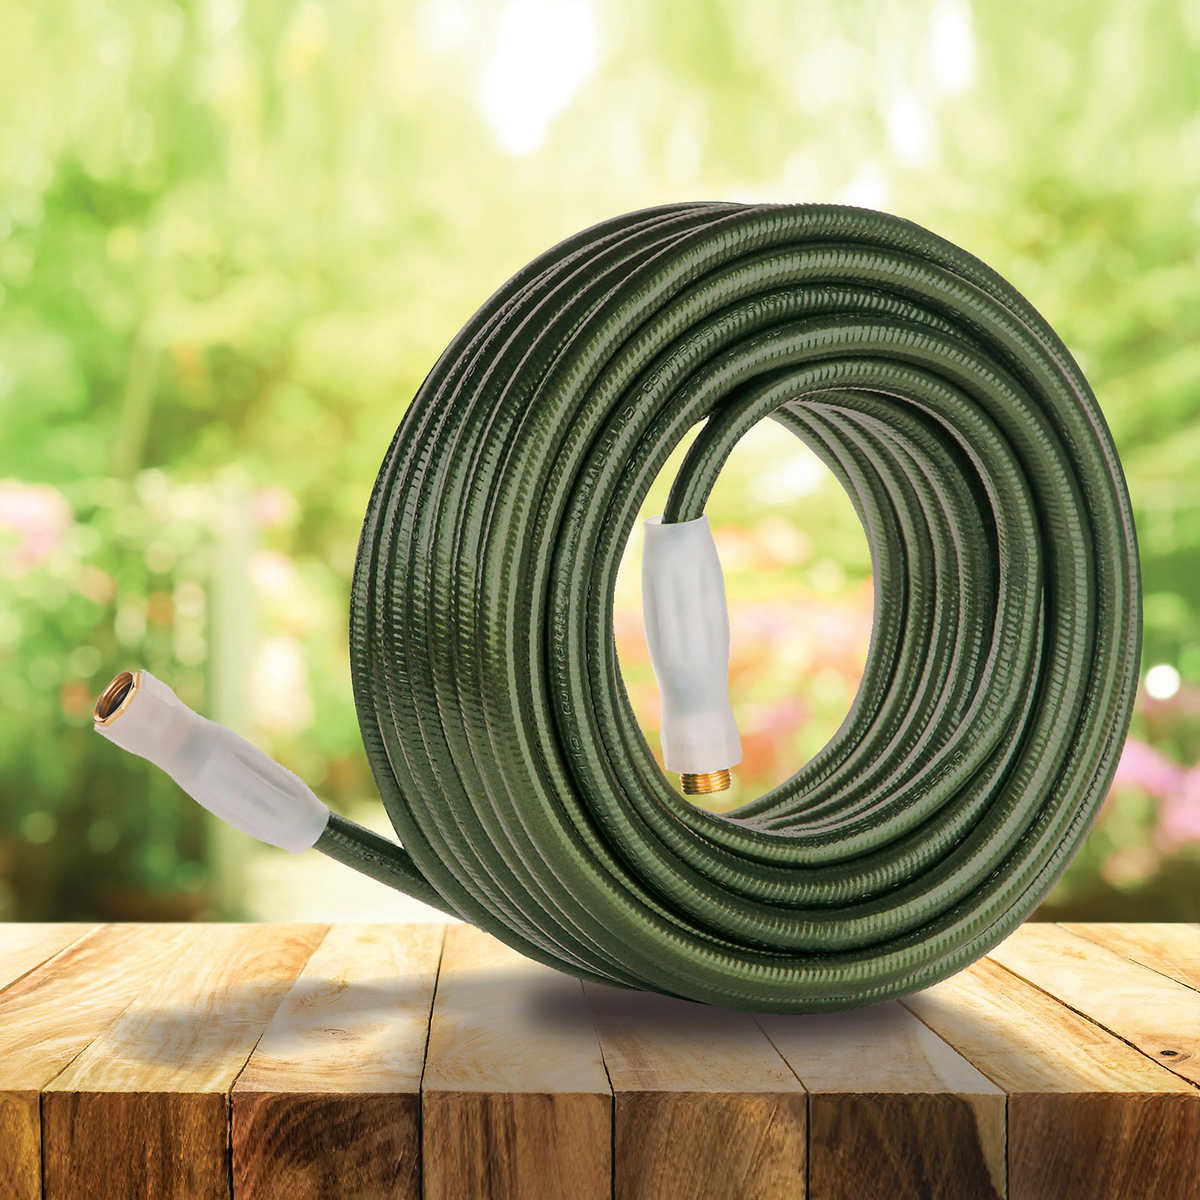 Flexon 5/8 in. x 100 ft. Contractor Grade Hose with Guard & Grip